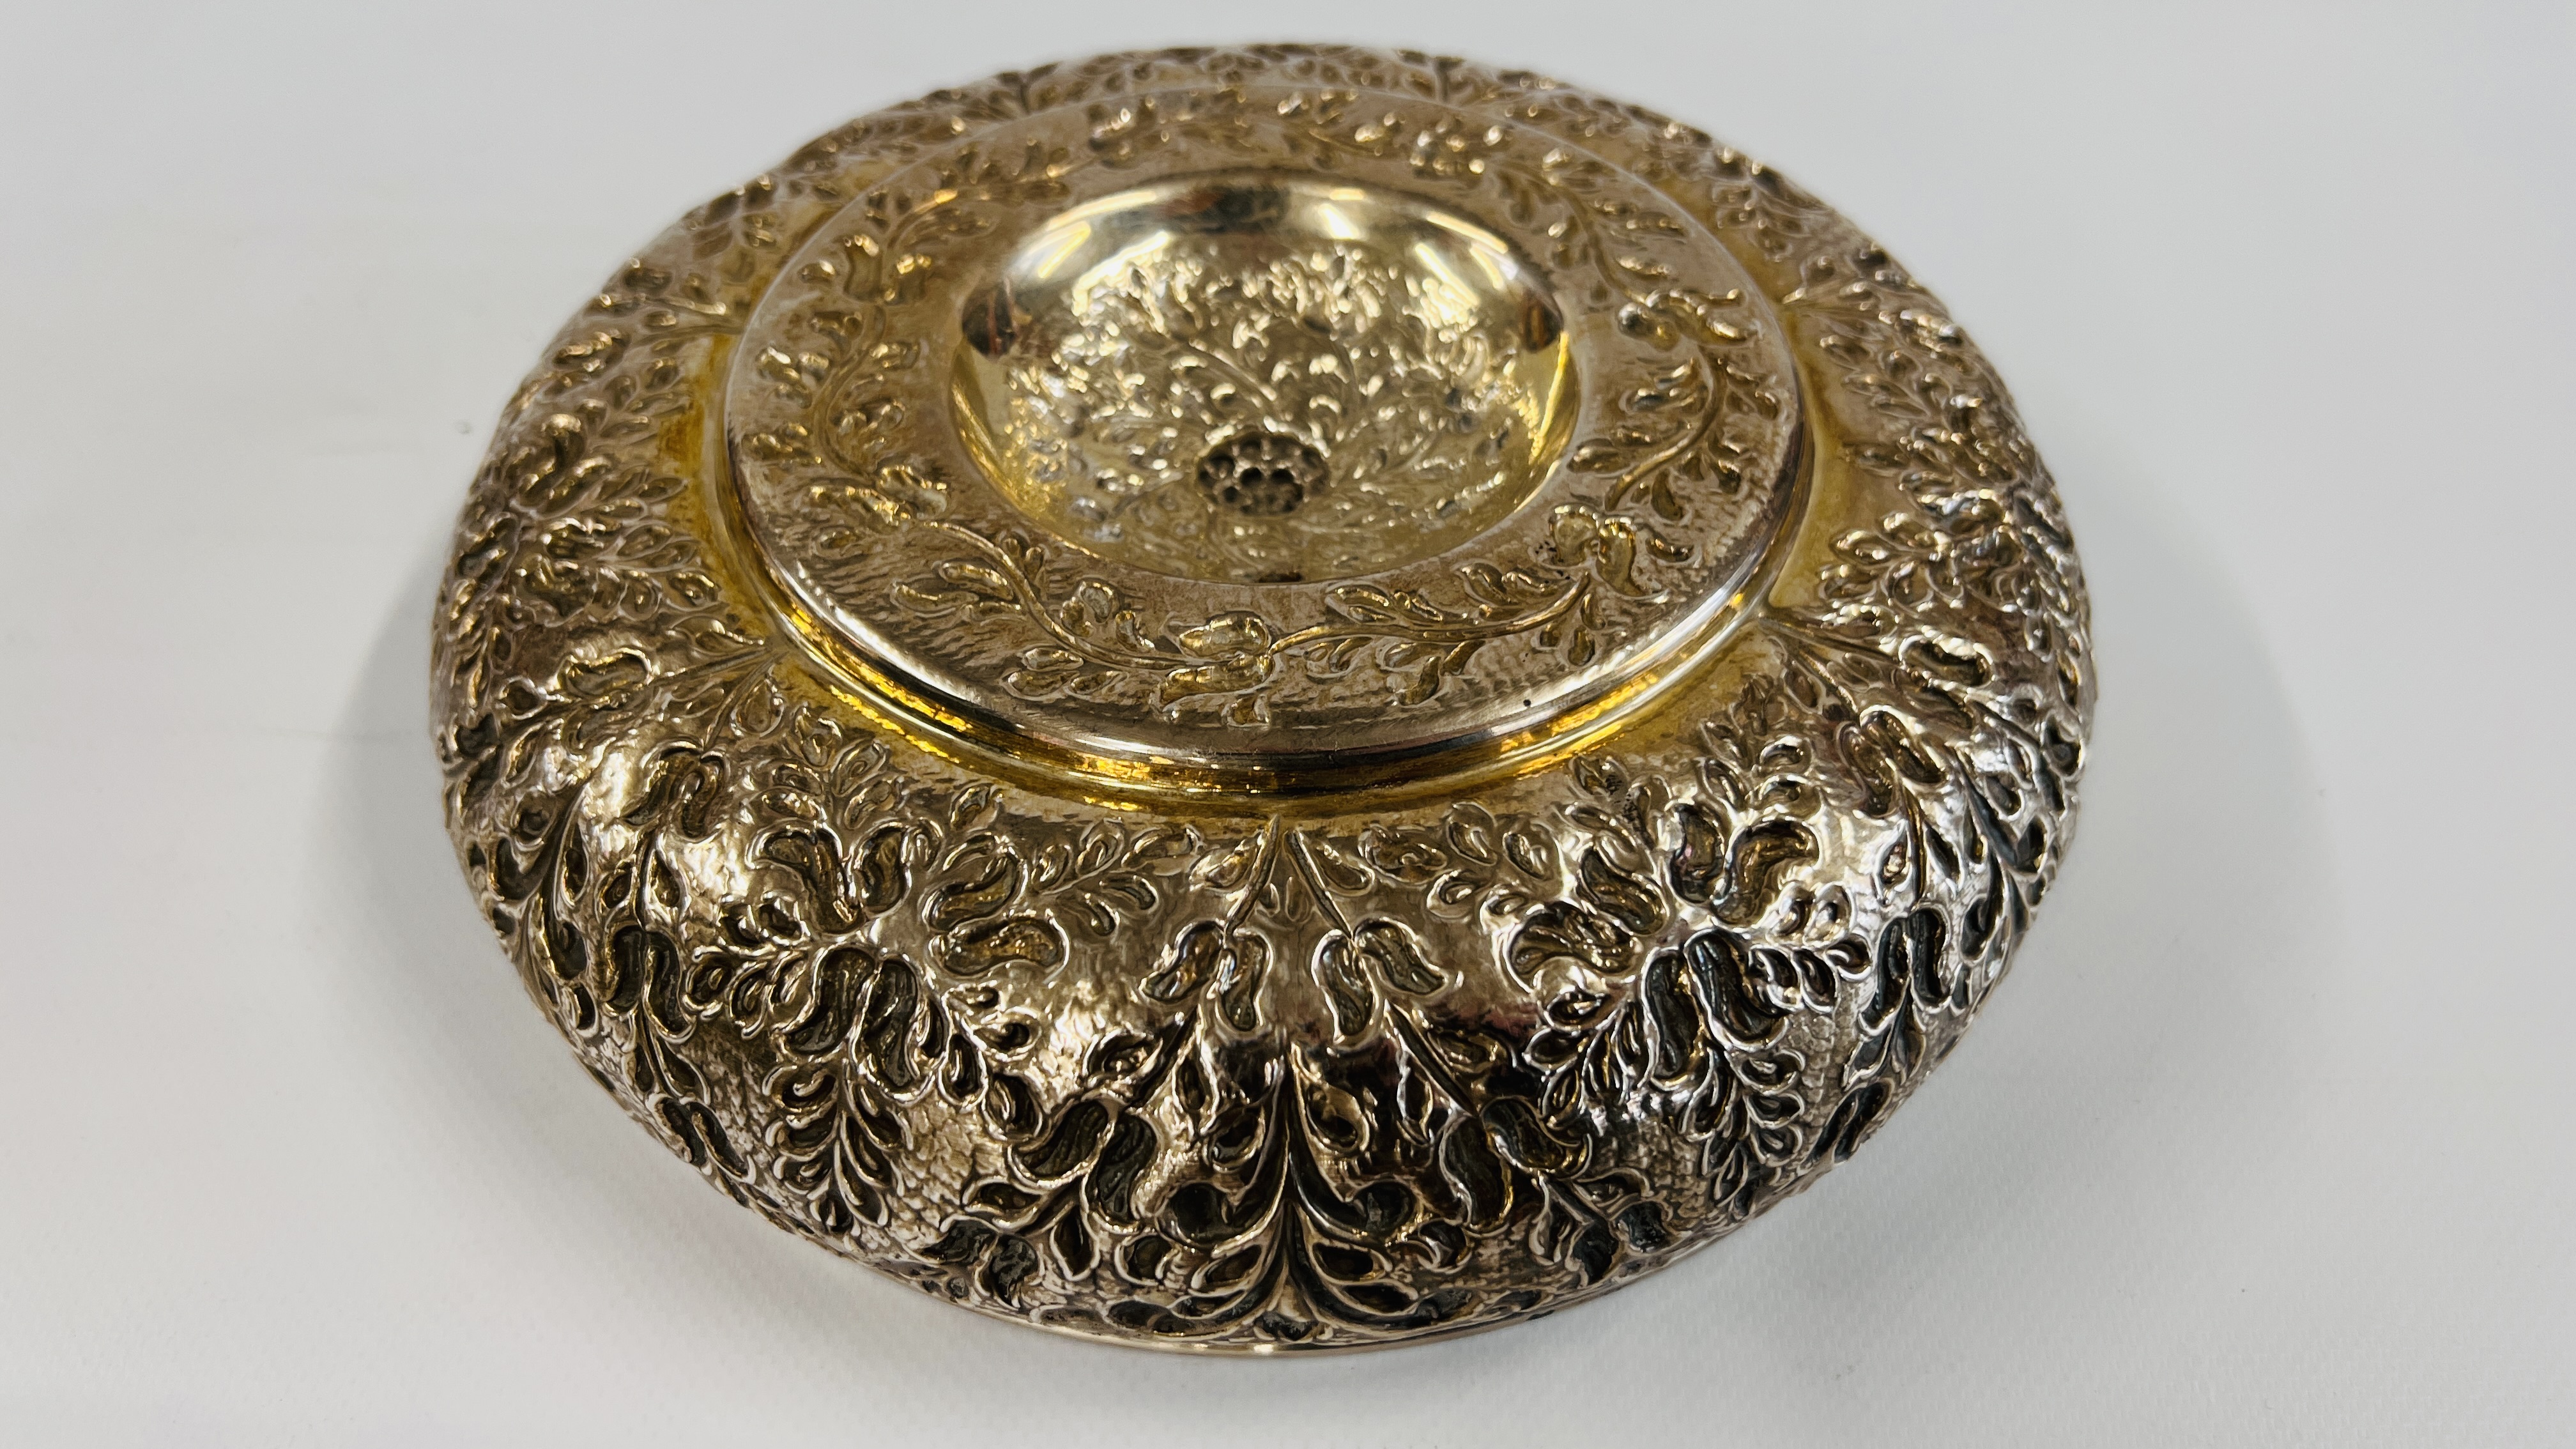 AN EASTERN OTTOMAN WHITE METAL REPOUSSED ITAMAM BOWL MARKED 900, DIA. 20CM X H. 6CM. - Image 3 of 5